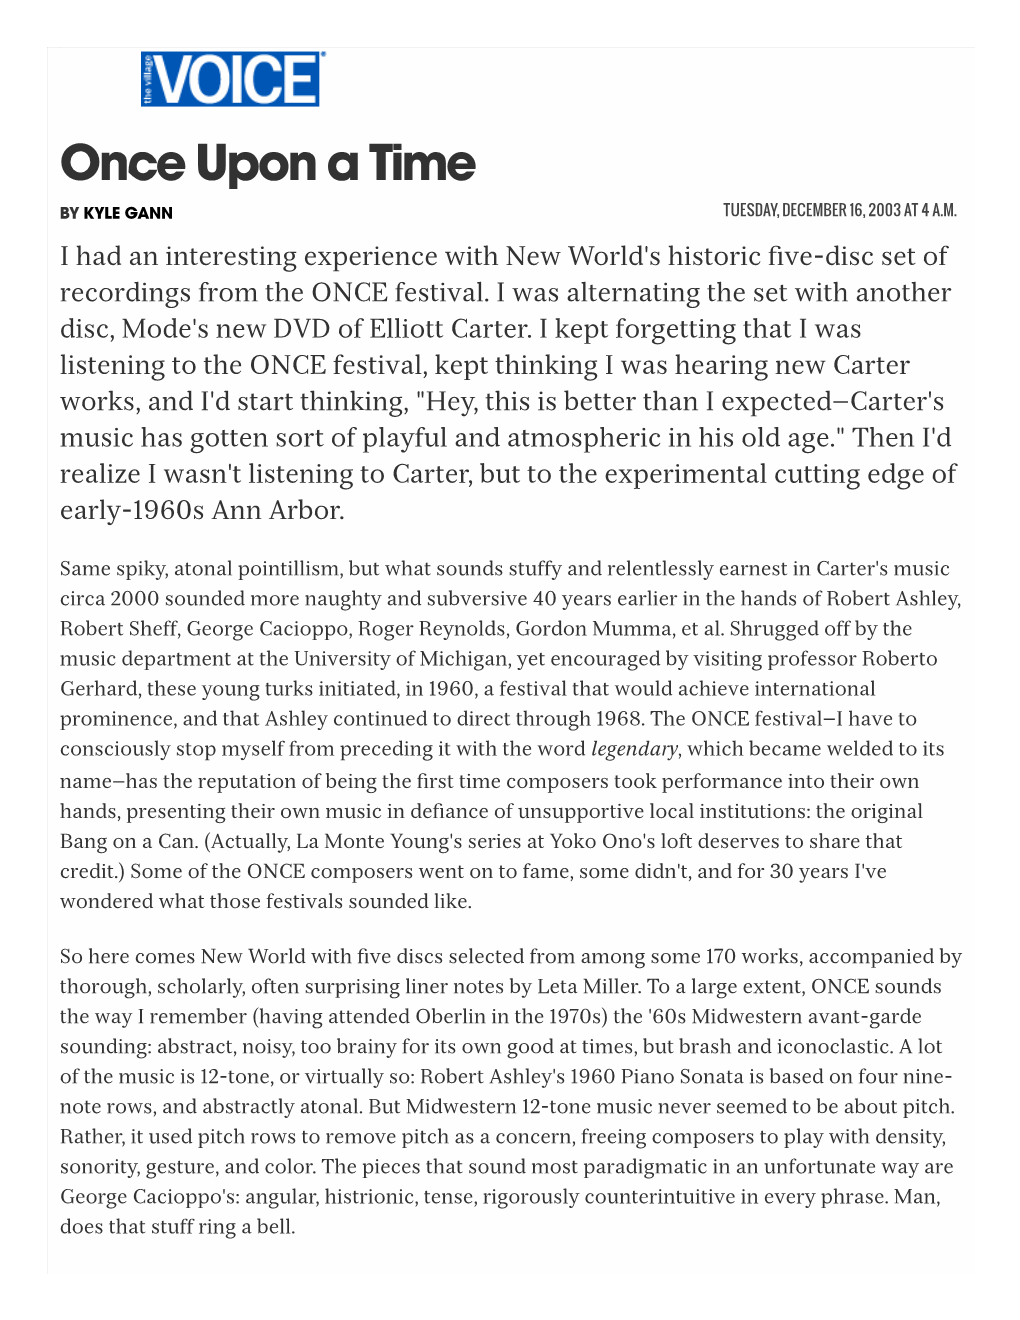 Once Upon a Time by KYLE GANN TUESDAY, DECEMBER 16, 2003 at 4 A.M